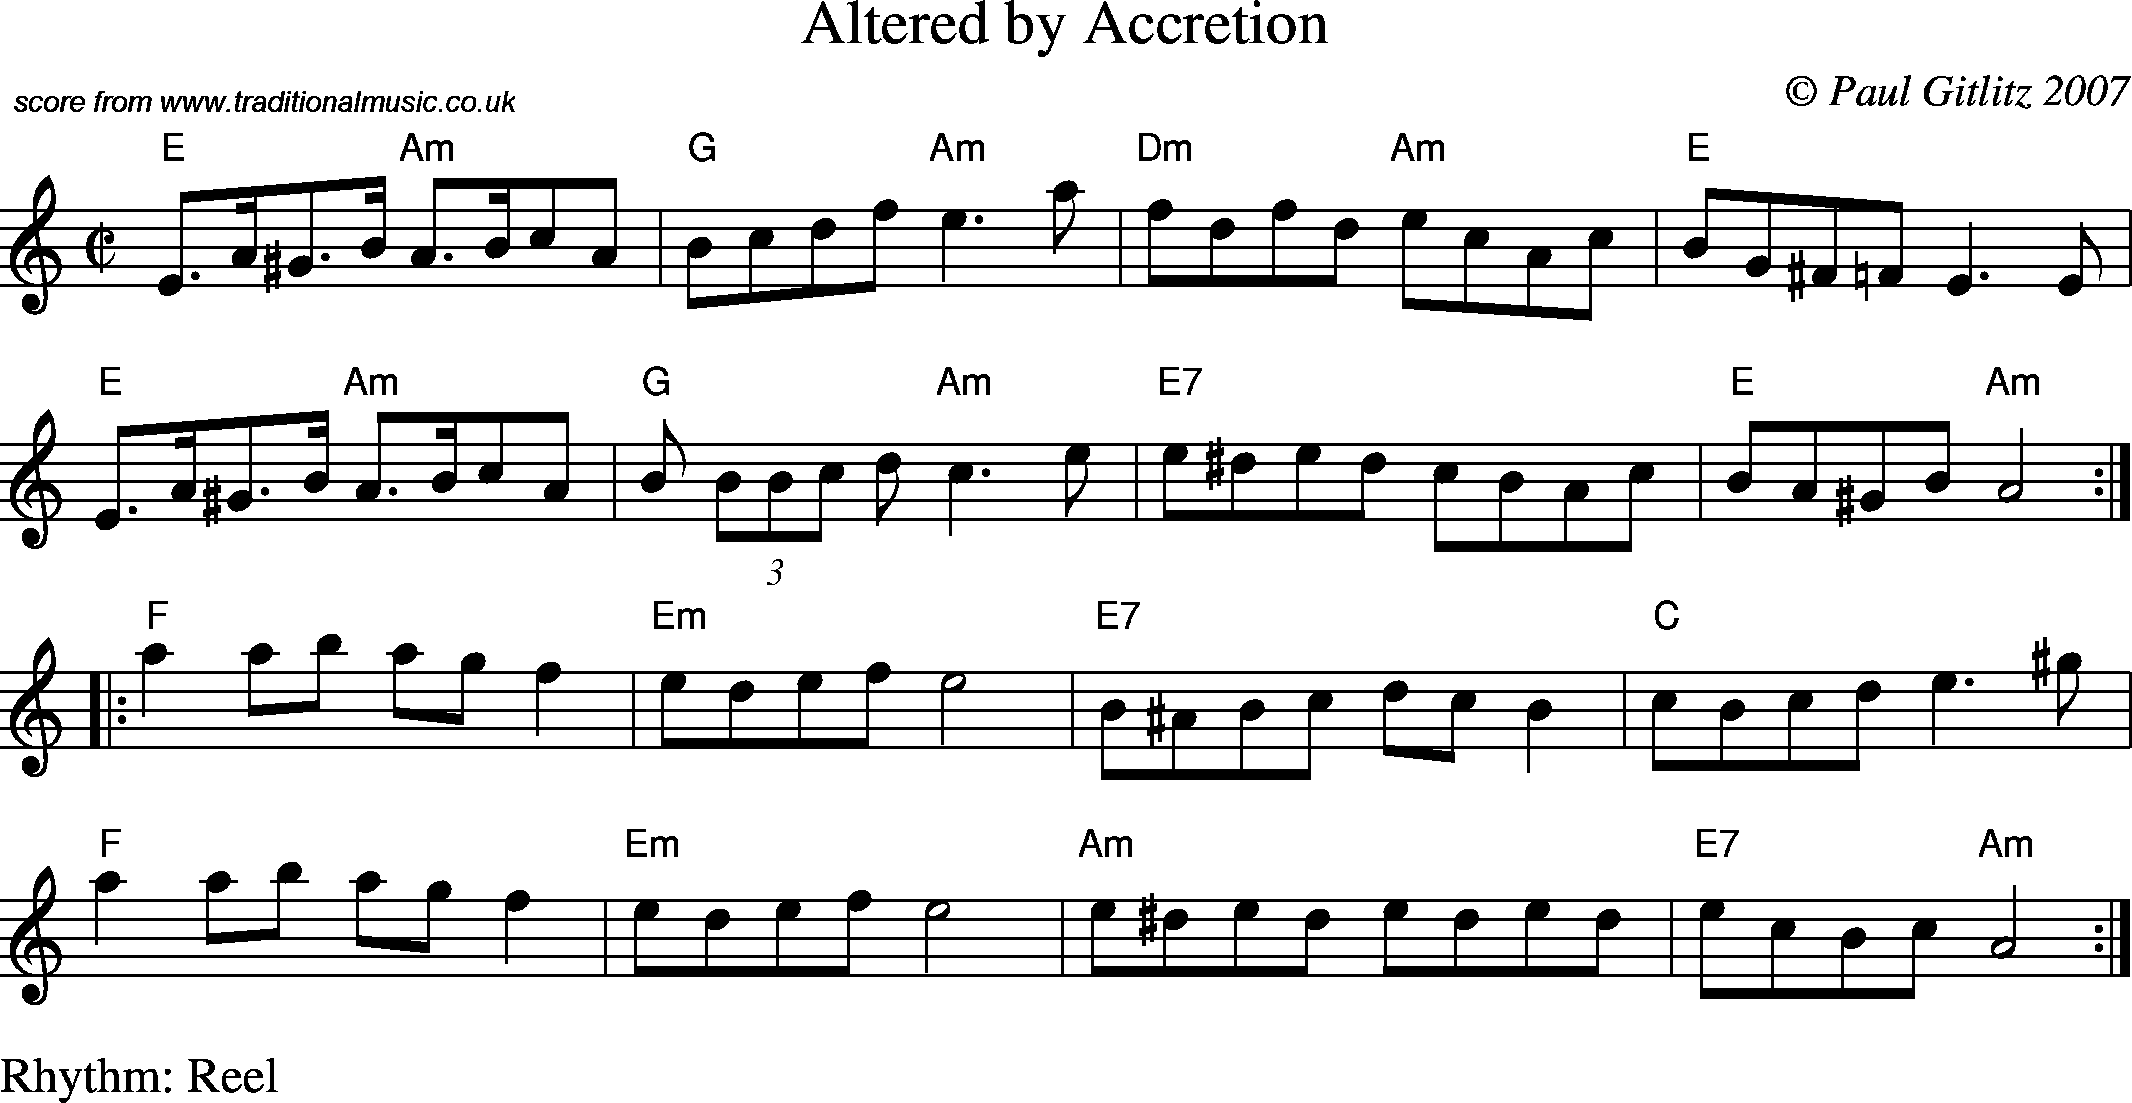 Sheet Music Score for Reel - Altered by Accretion